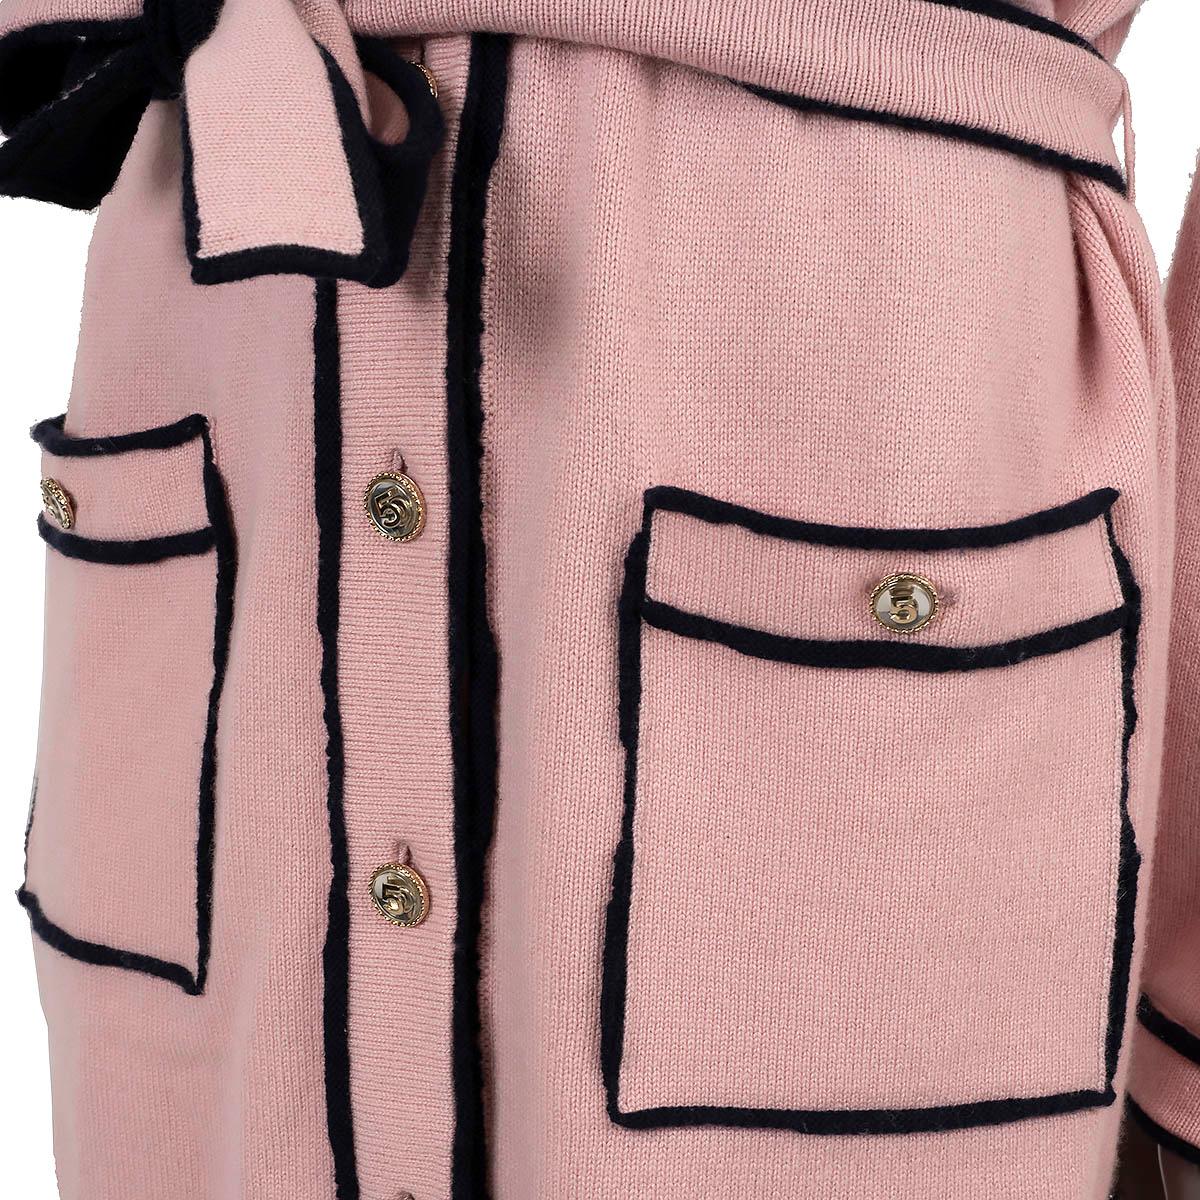 CHANEL pink & navy cashmere 2021 21S BELTED KNIT Dress 38 S For Sale 3